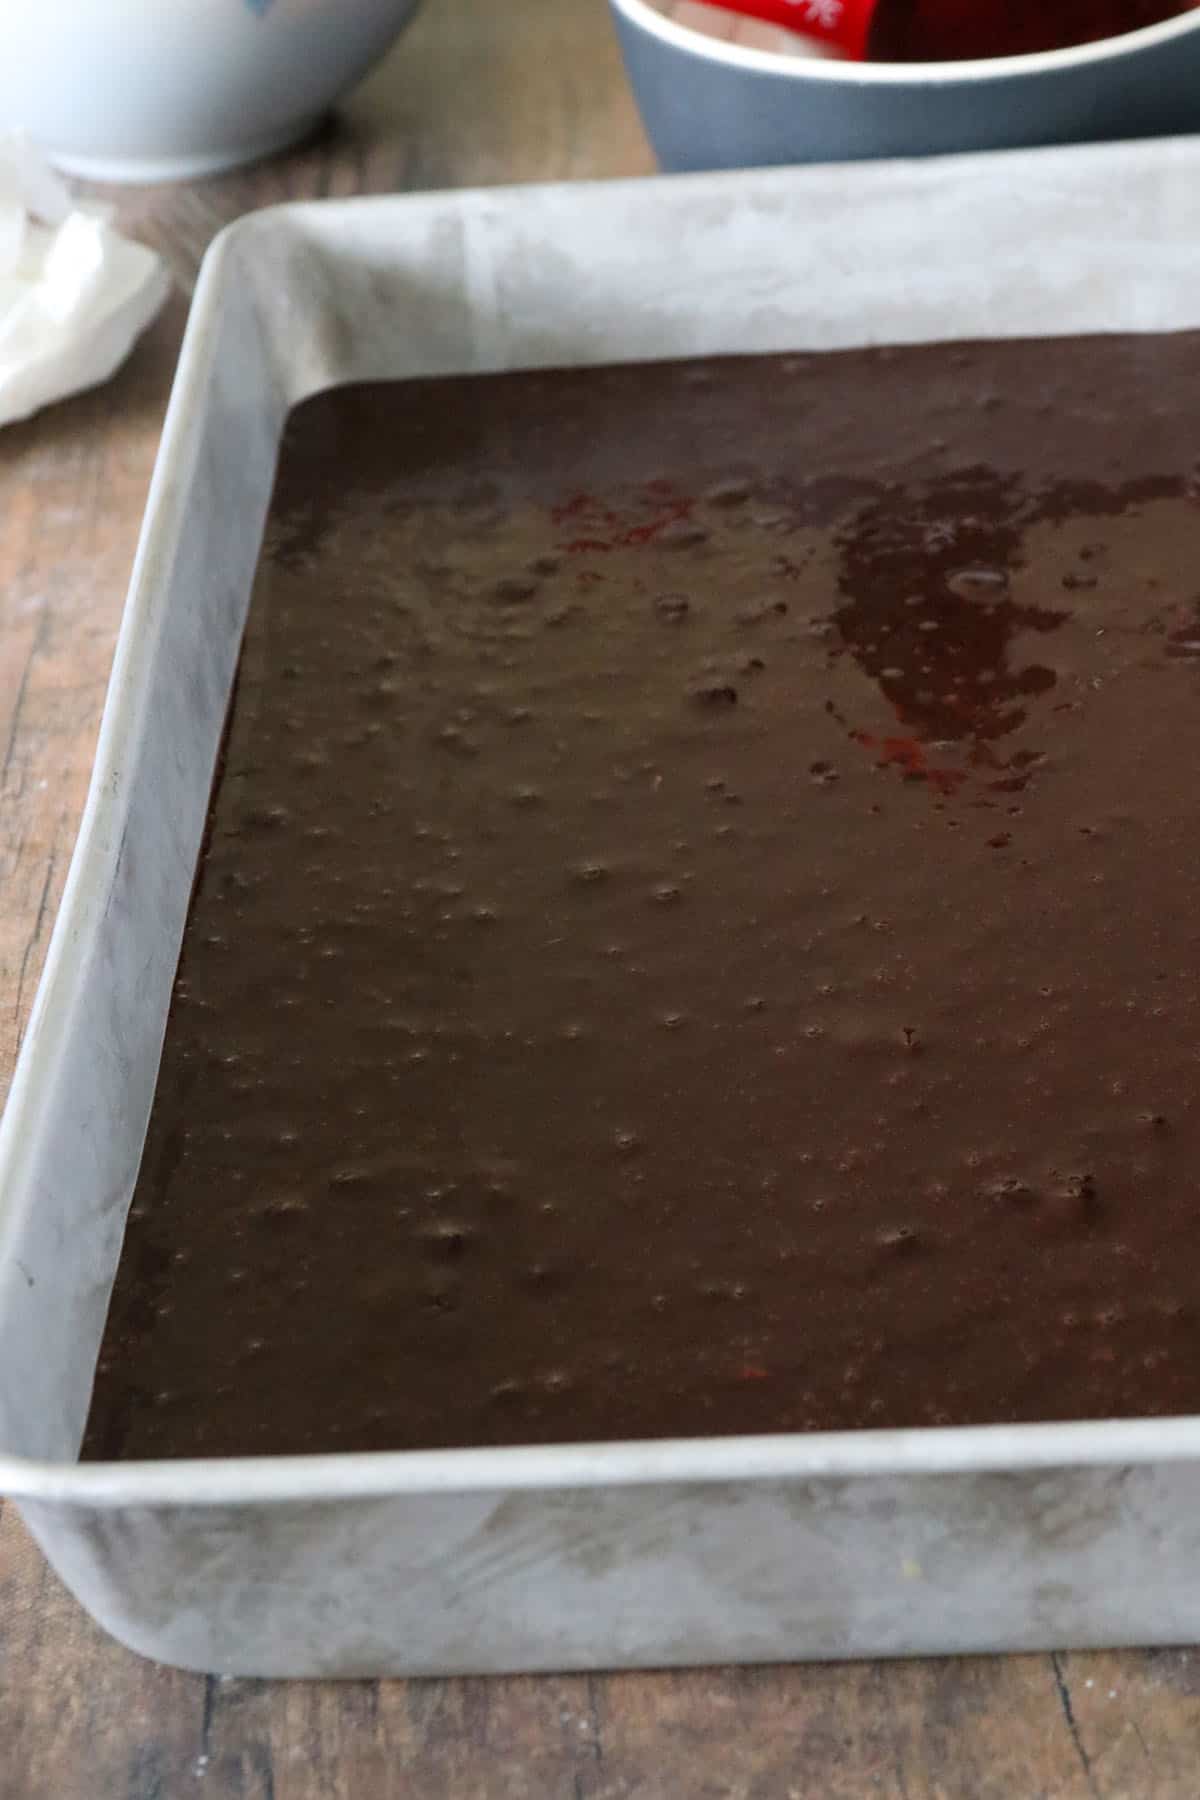 The chocolate cake batter in a pan.